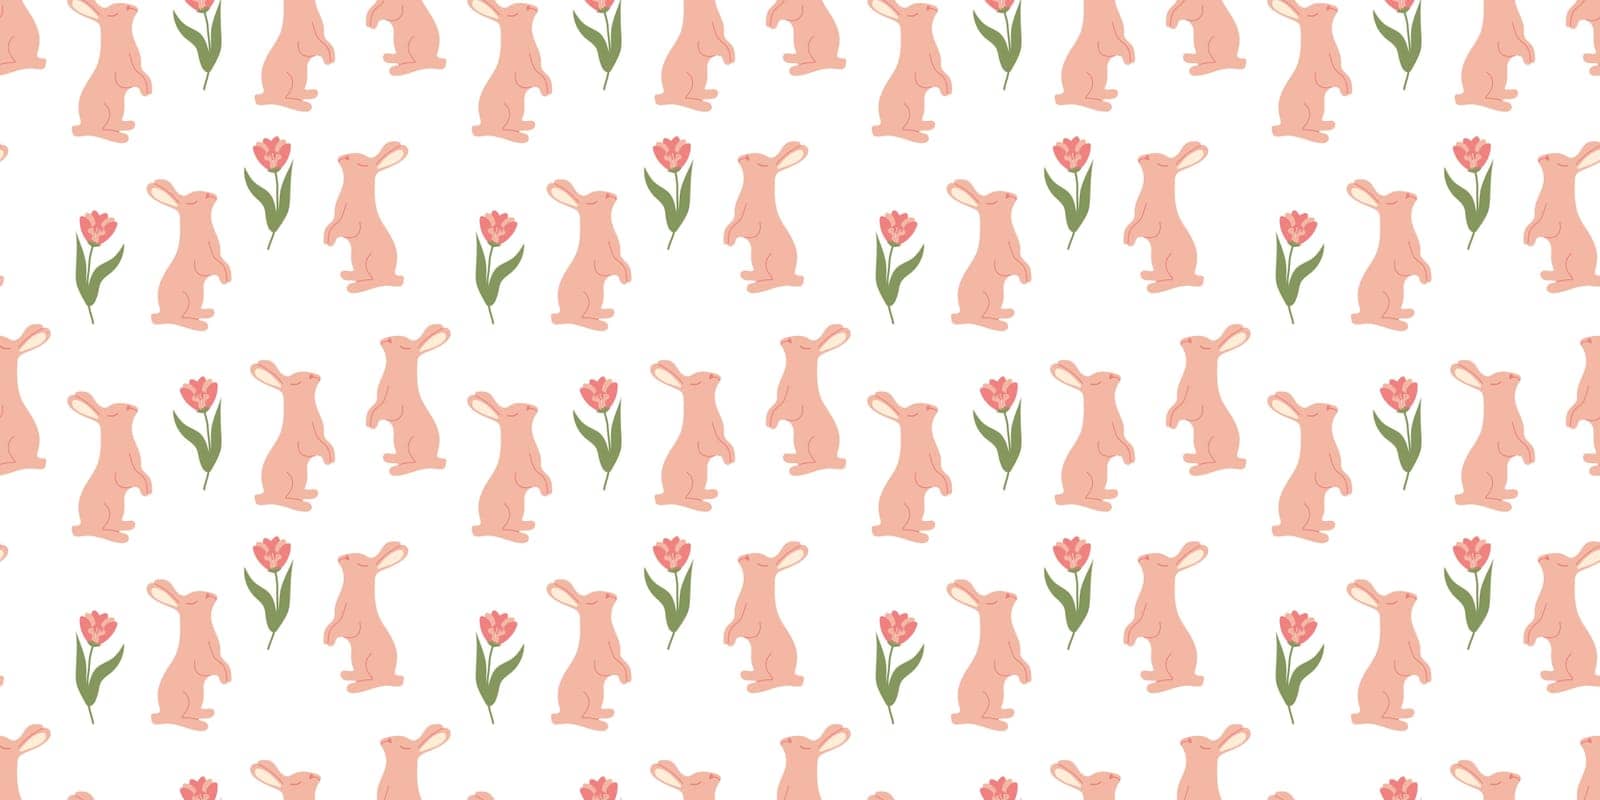 Bunny seamless pattern with leaves in doodle style. Endless Illustration with animals. White rabbits with botanical elements on white background. Cute kids design by Zhizhi